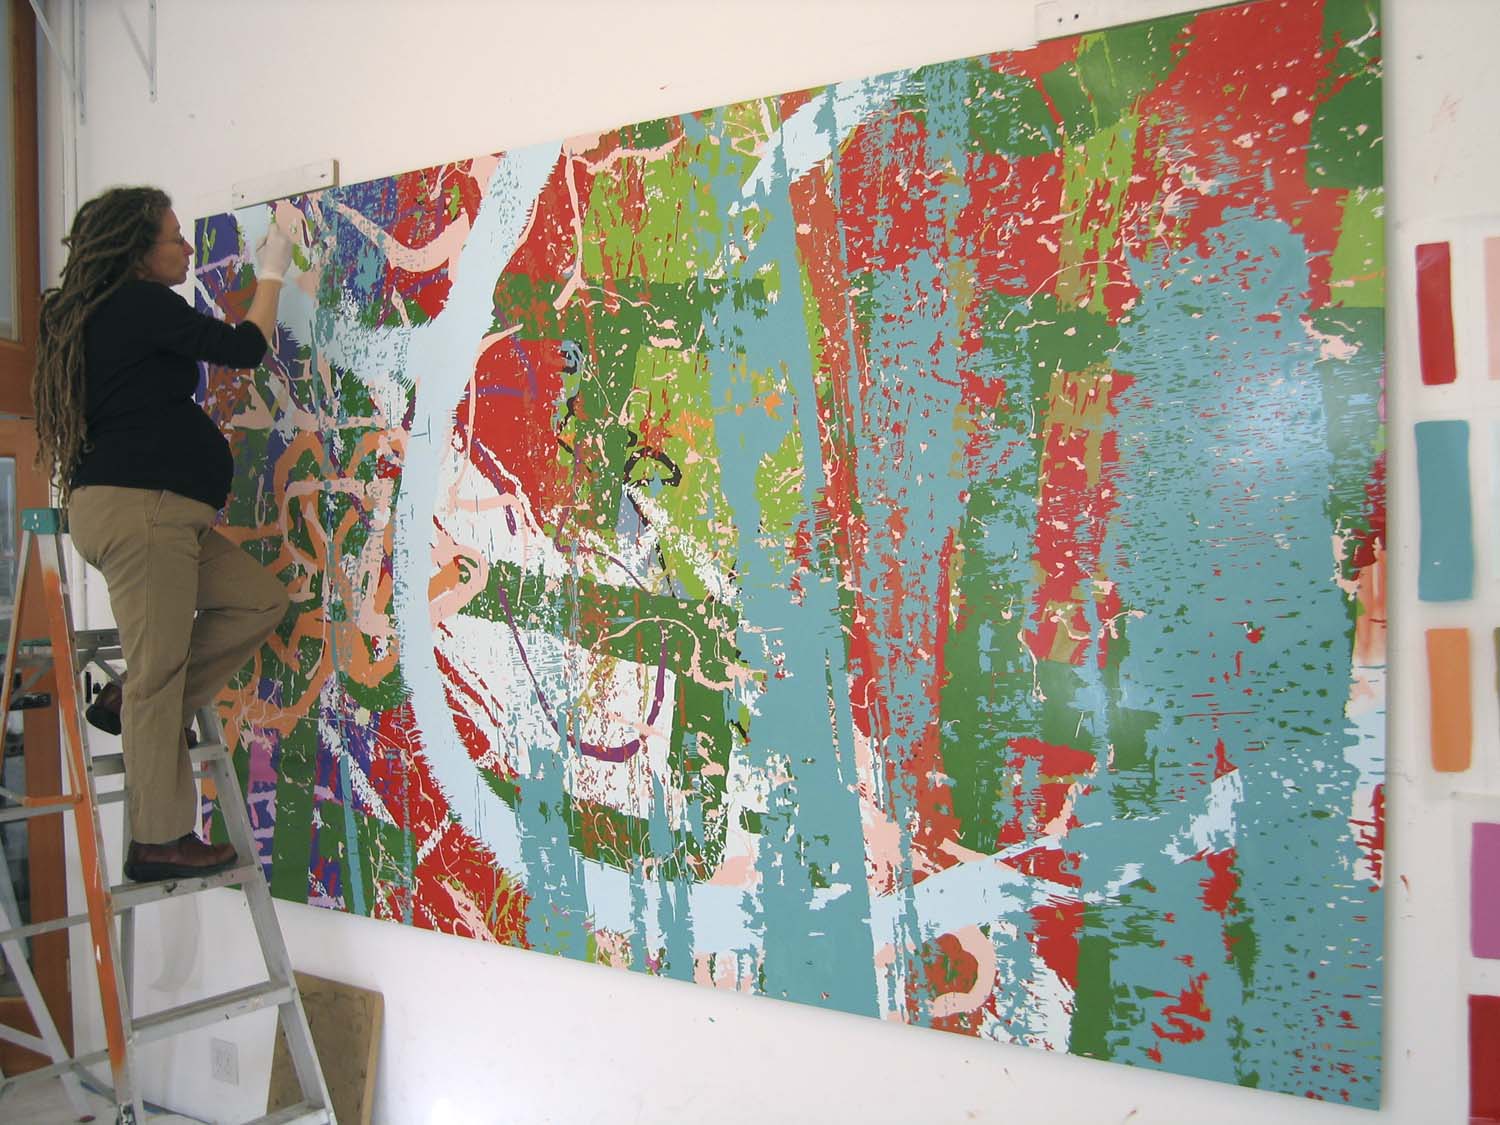 Calame painting while pregnant, 2007